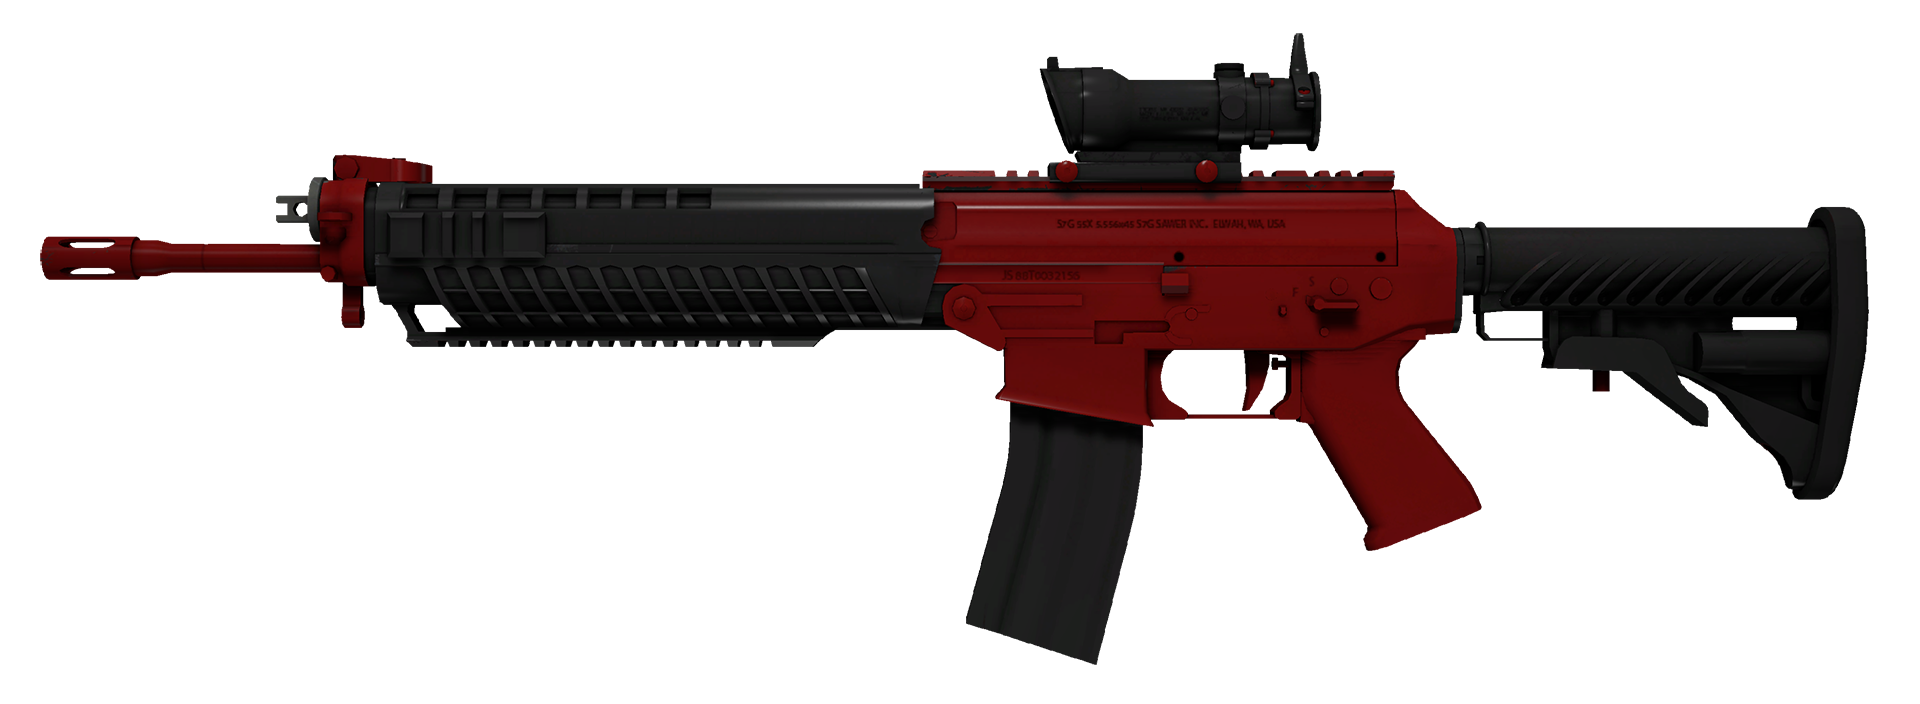 SG 553 Candy Apple Large Rendering